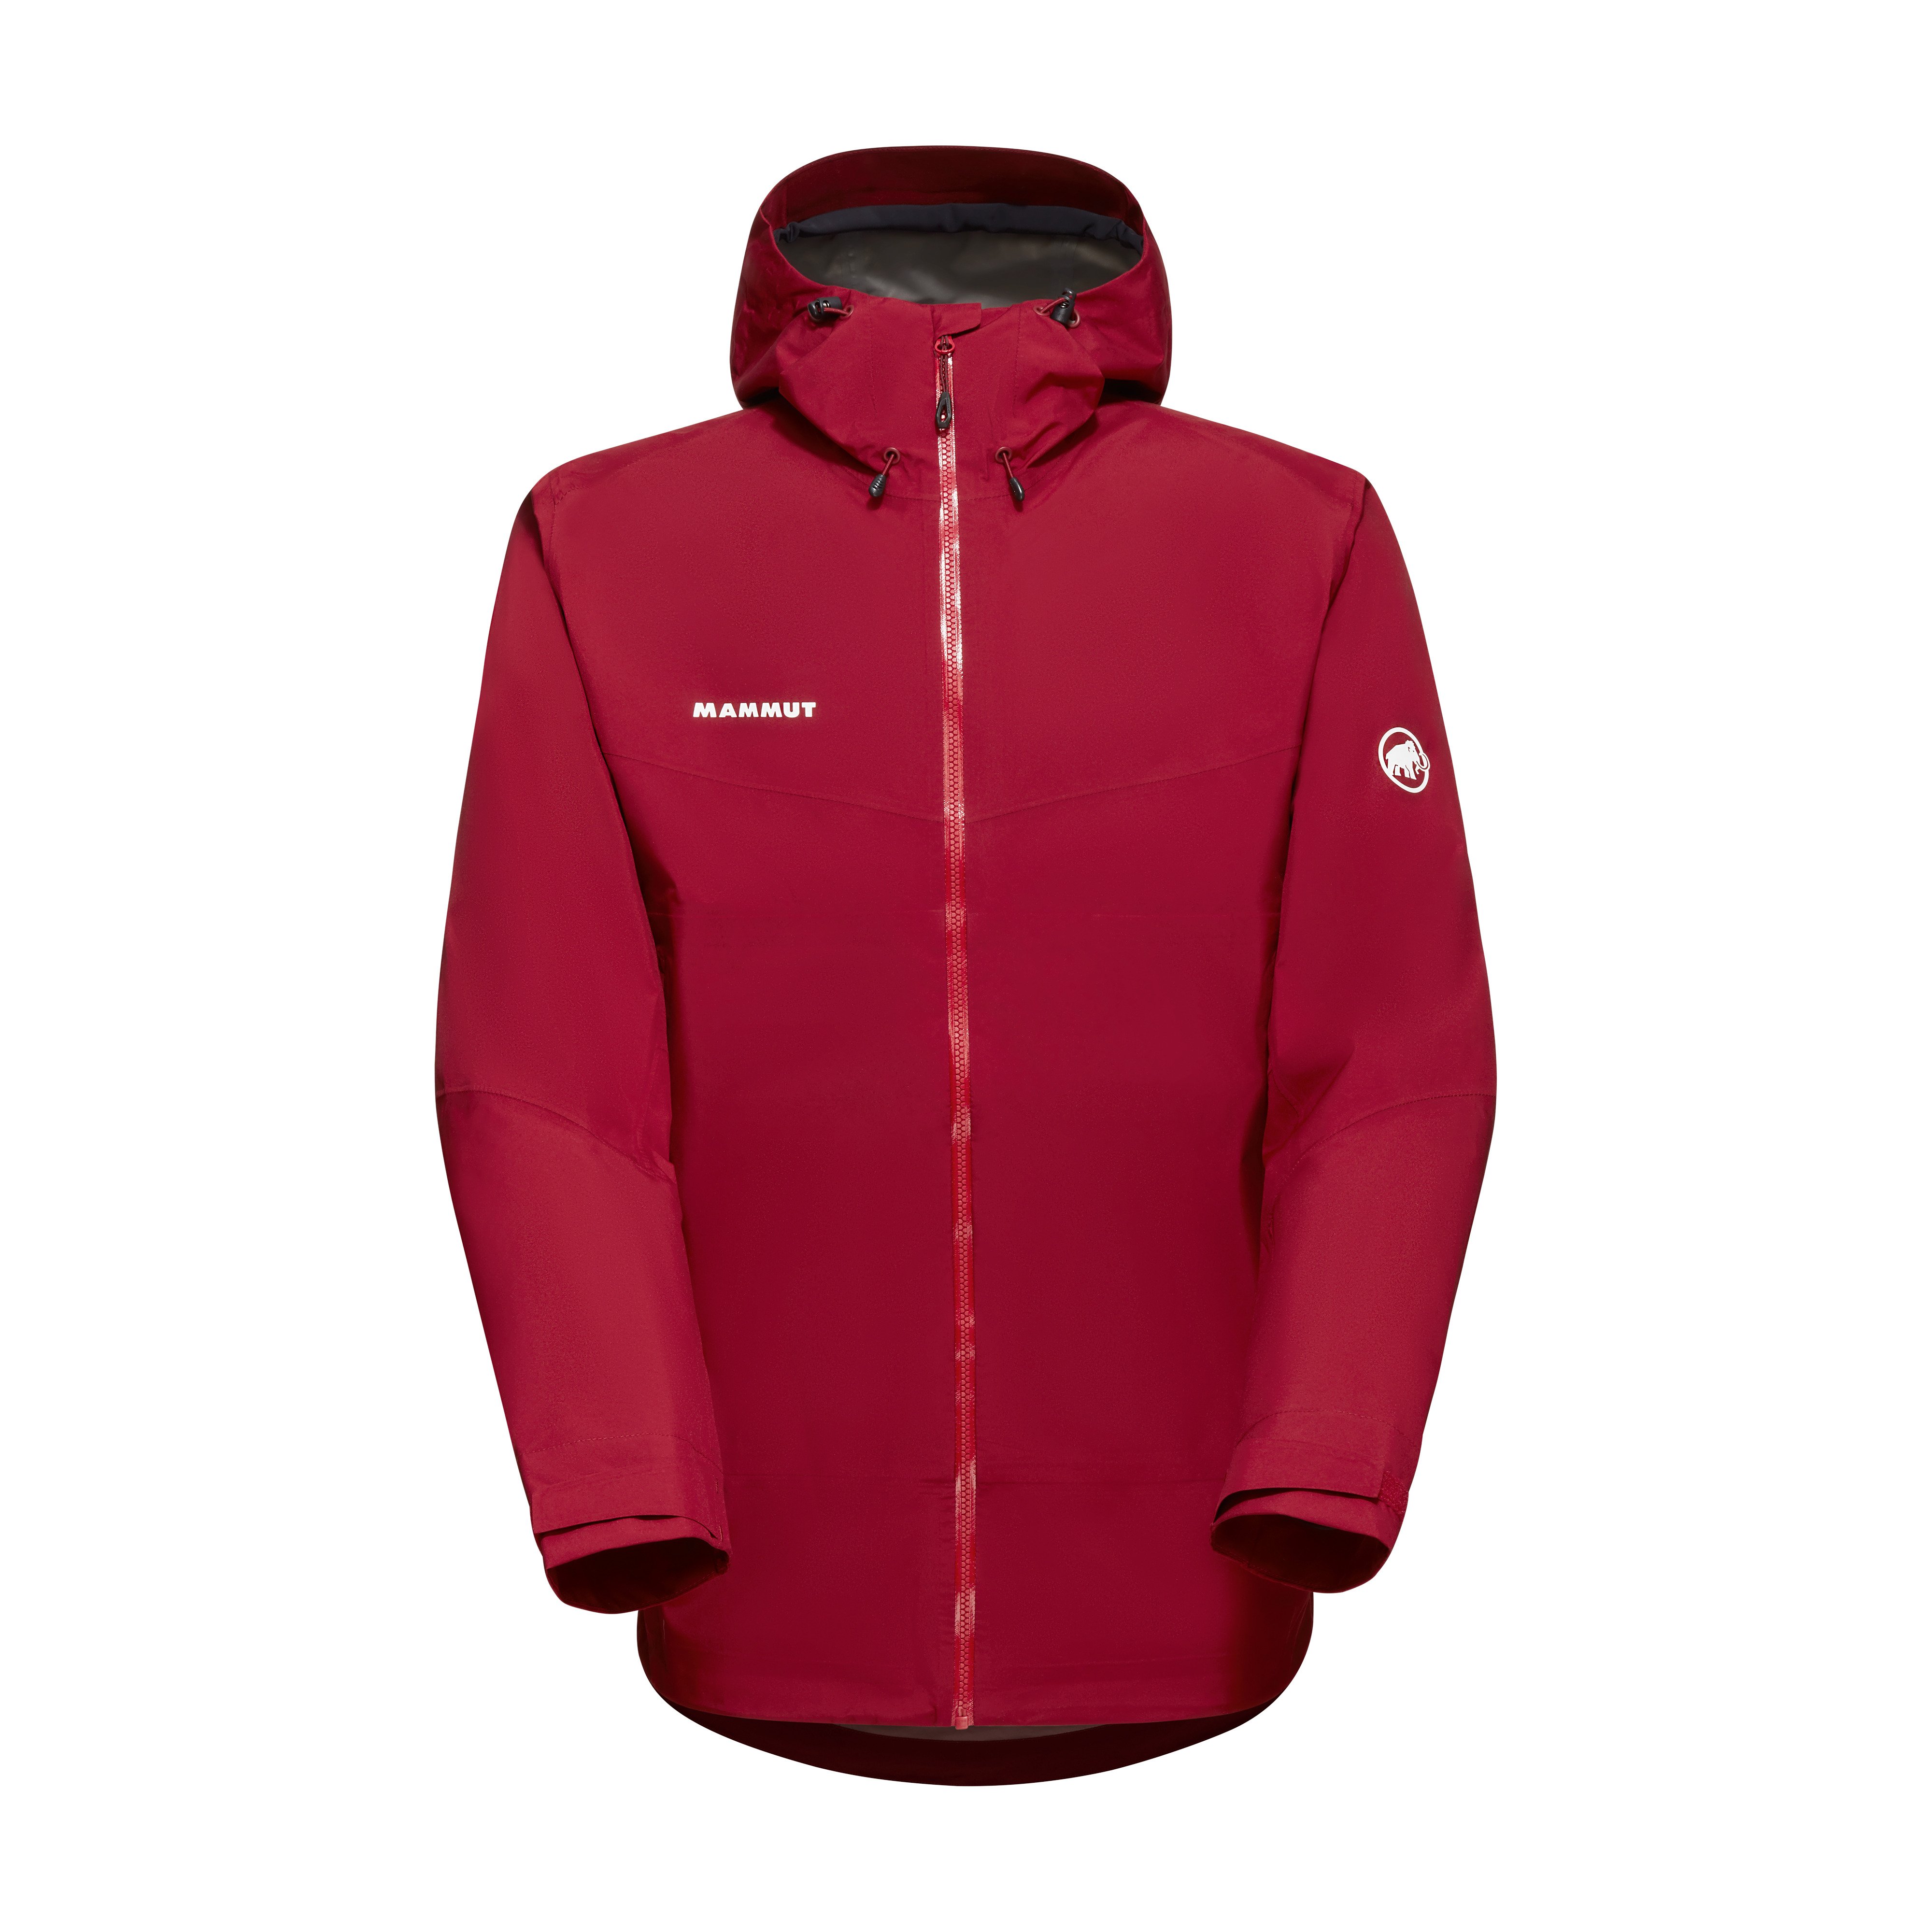 Convey Tour HS Hooded Jacket Men - blood red, XXL product image